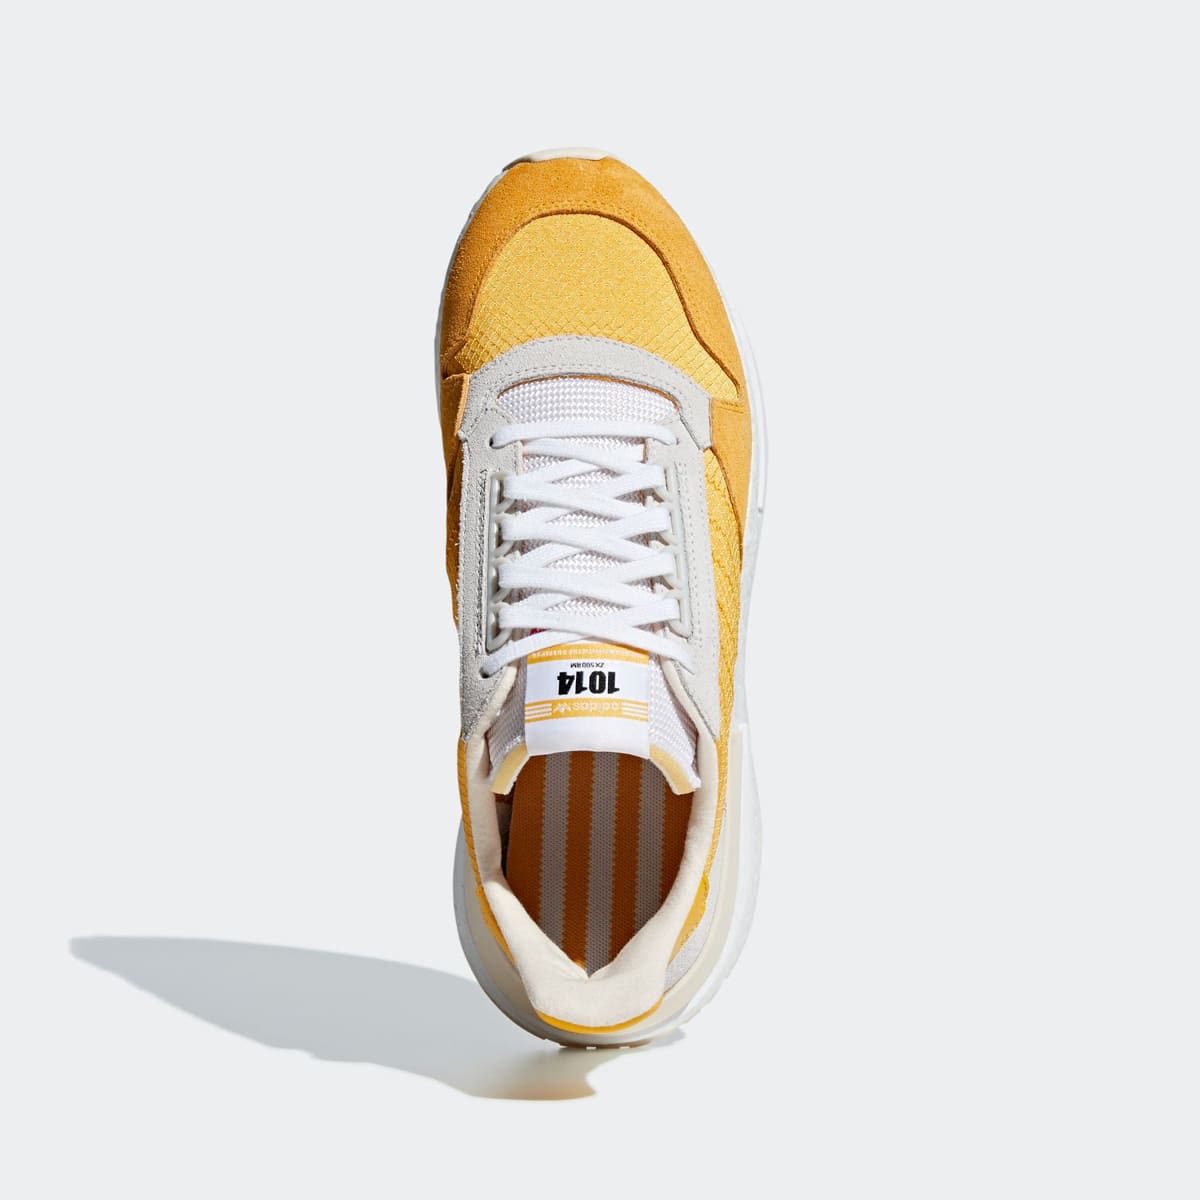 Ártico trama Agnes Gray More Racing Bib-Labelled adidas Trainers are Available Now! | HOUSE OF HEAT